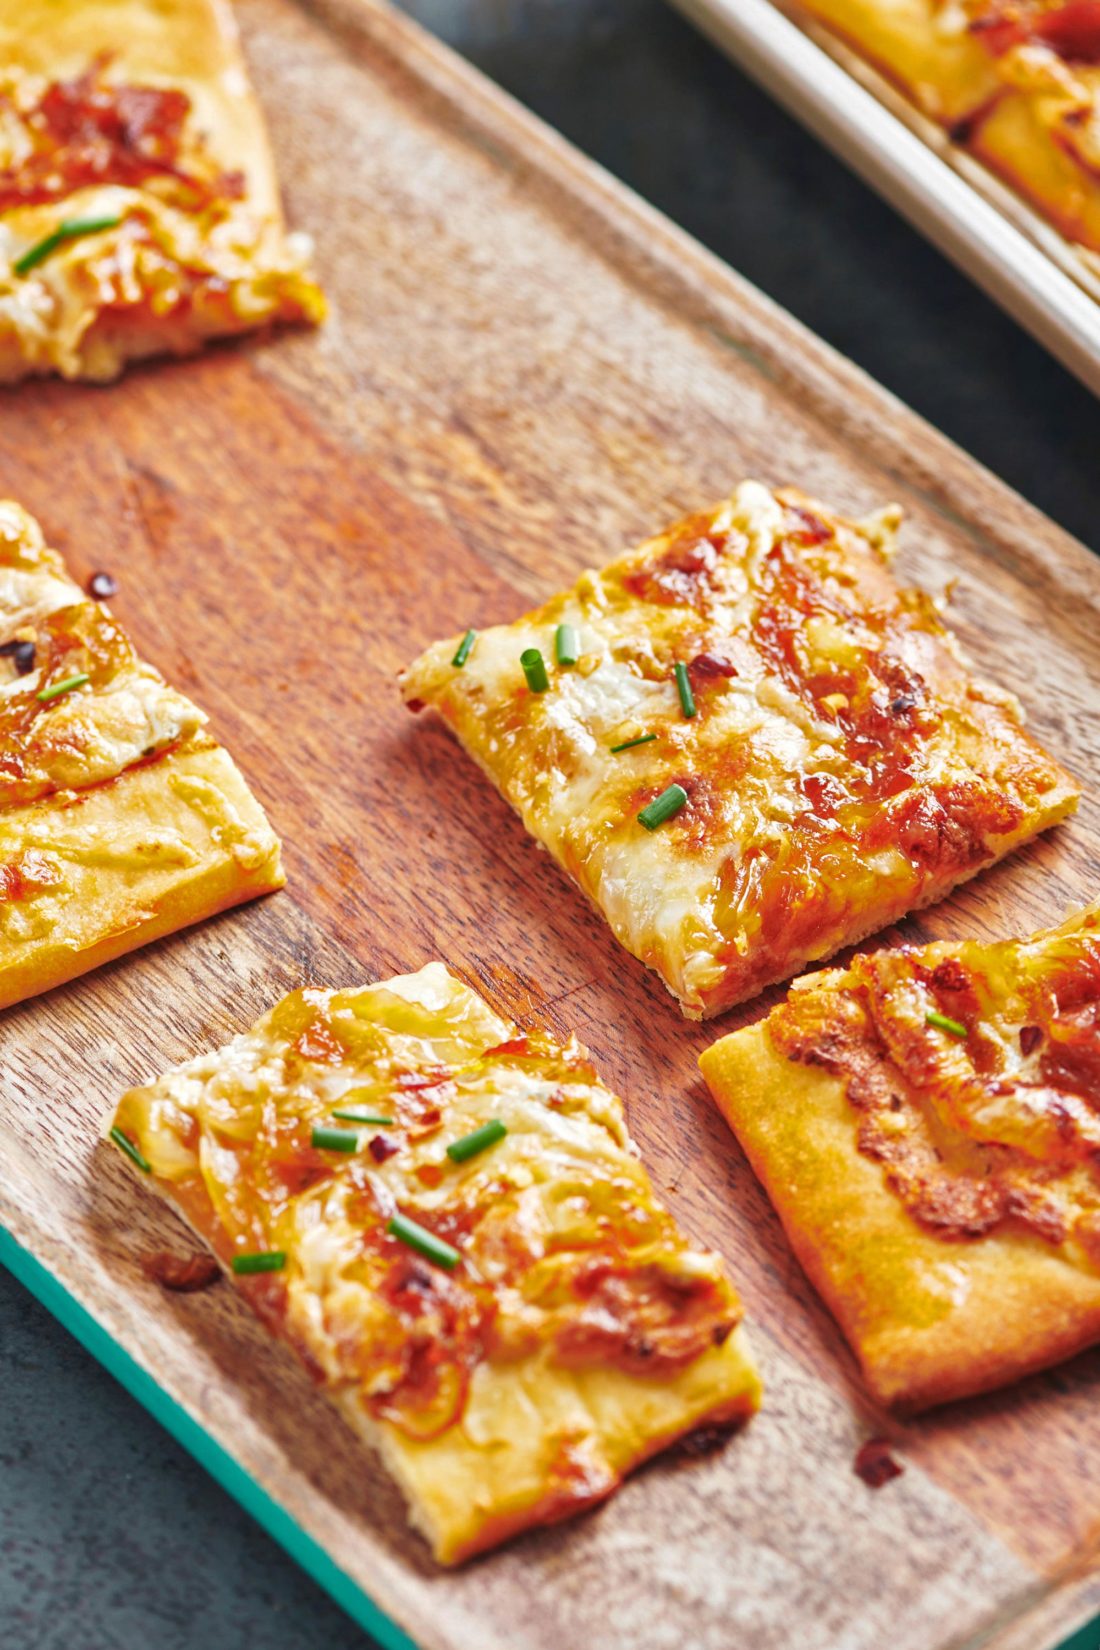 Slices of Four Cheese Pizza with Caramelized Onions on a wooden plate.